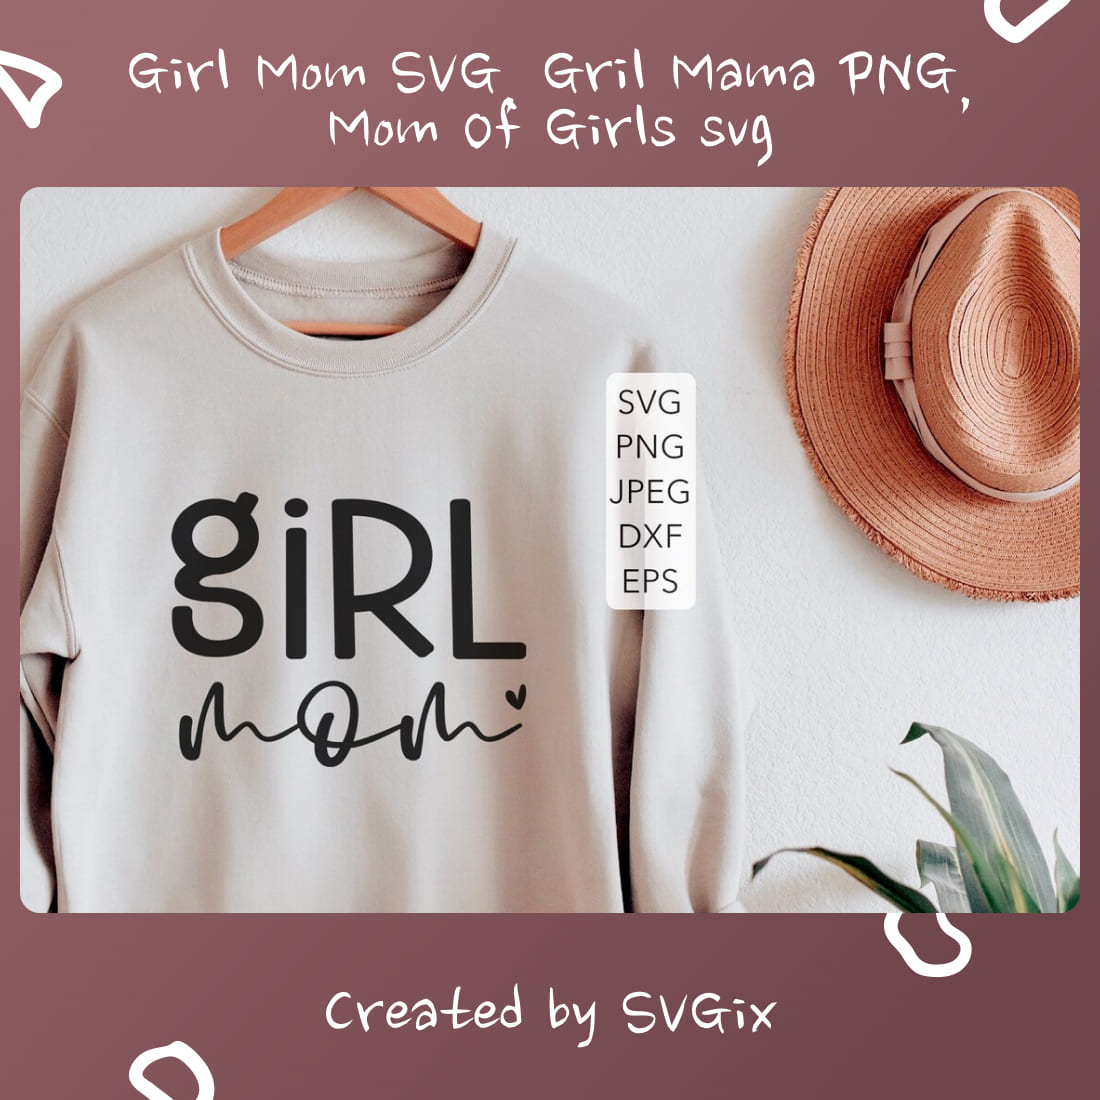 Mom Of Girls svg main cover.